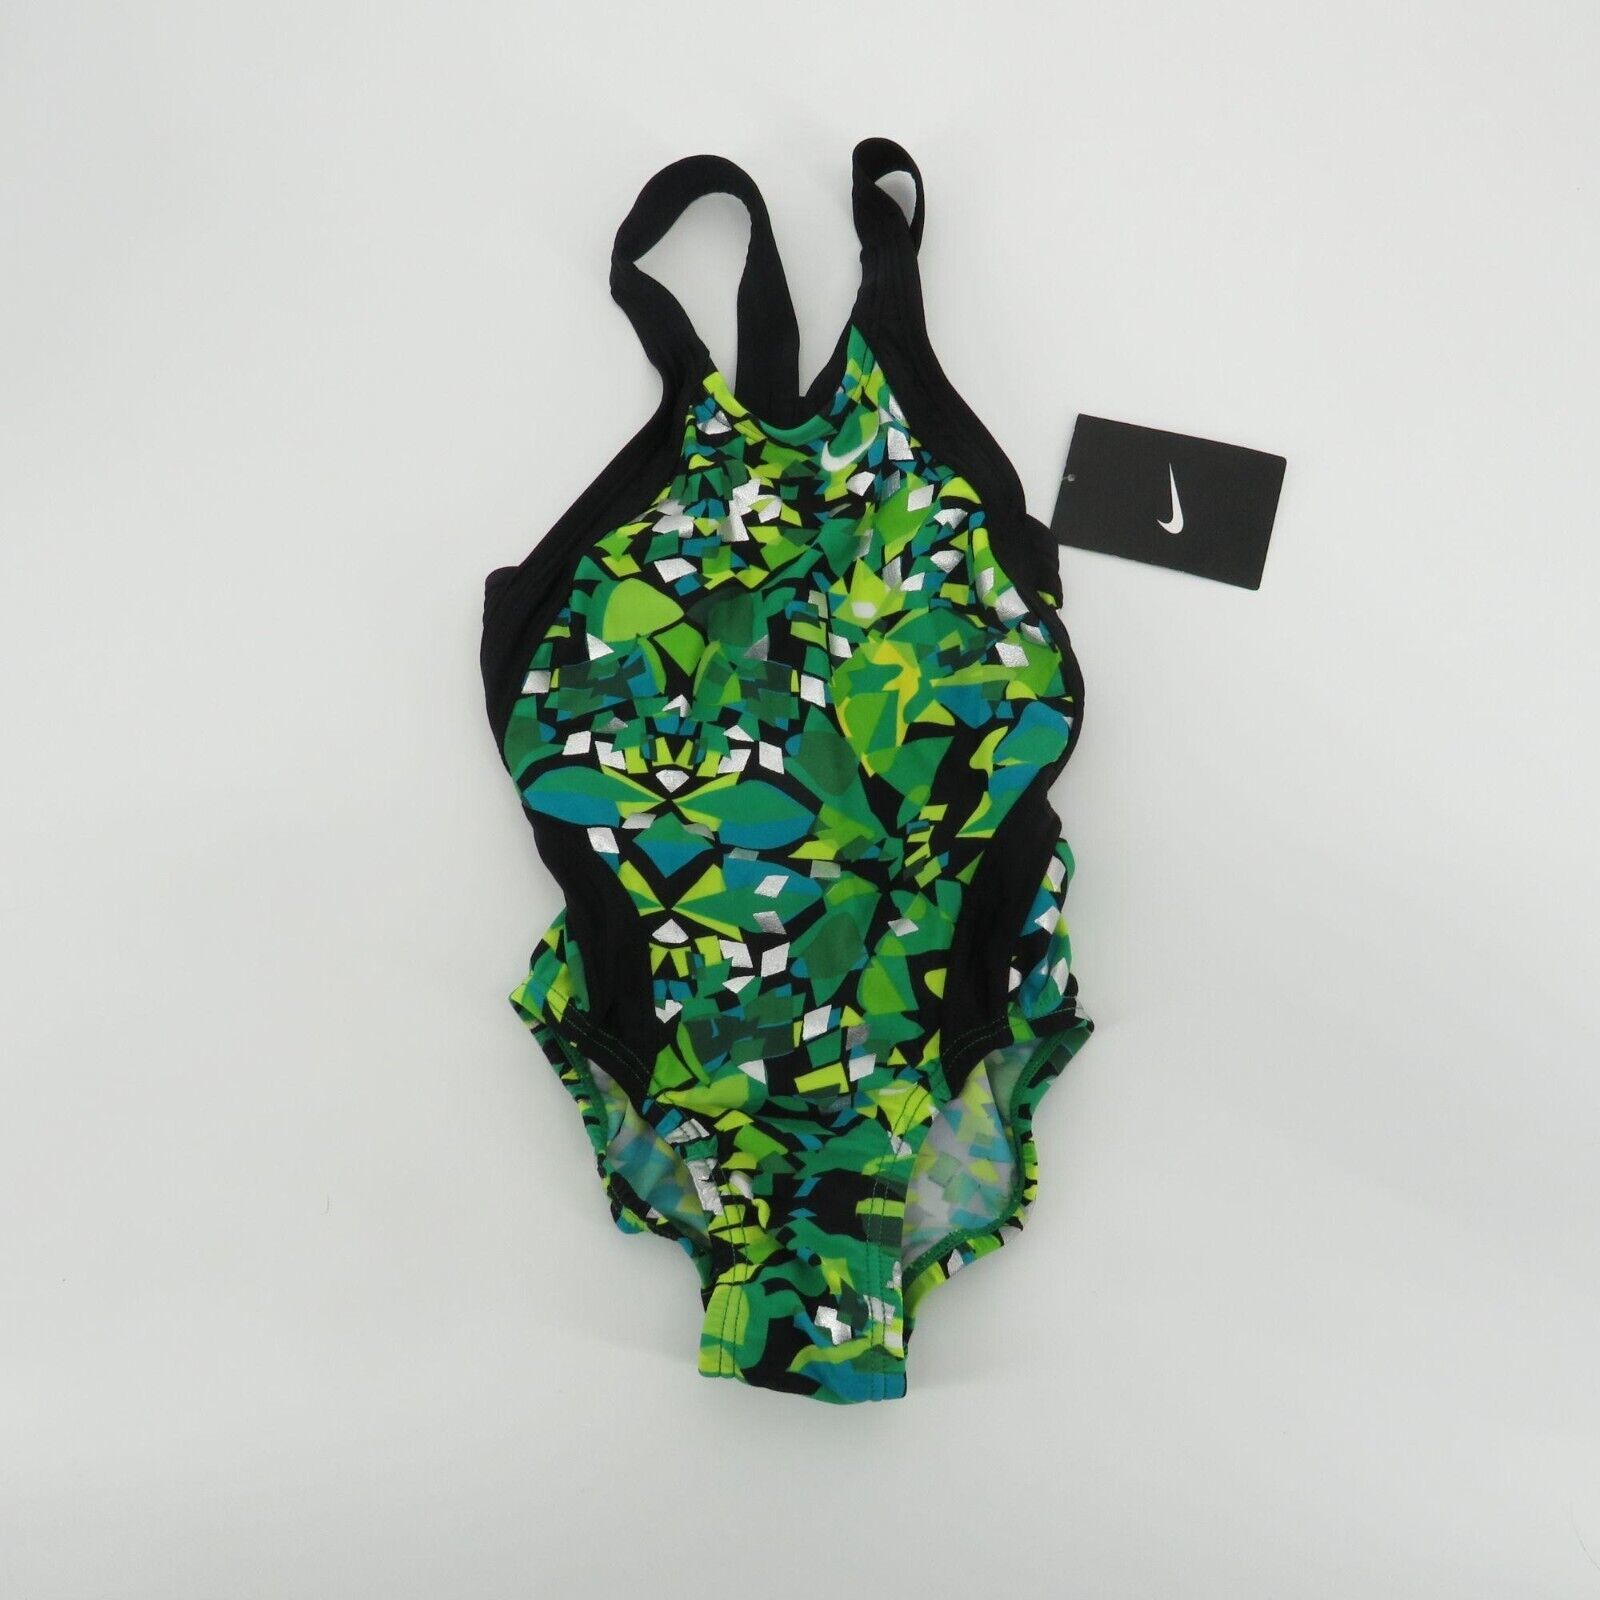 Primary image for Nike Girls Green Silver 1 Piece Swimsuit Size 5 (20 ) NWT $71